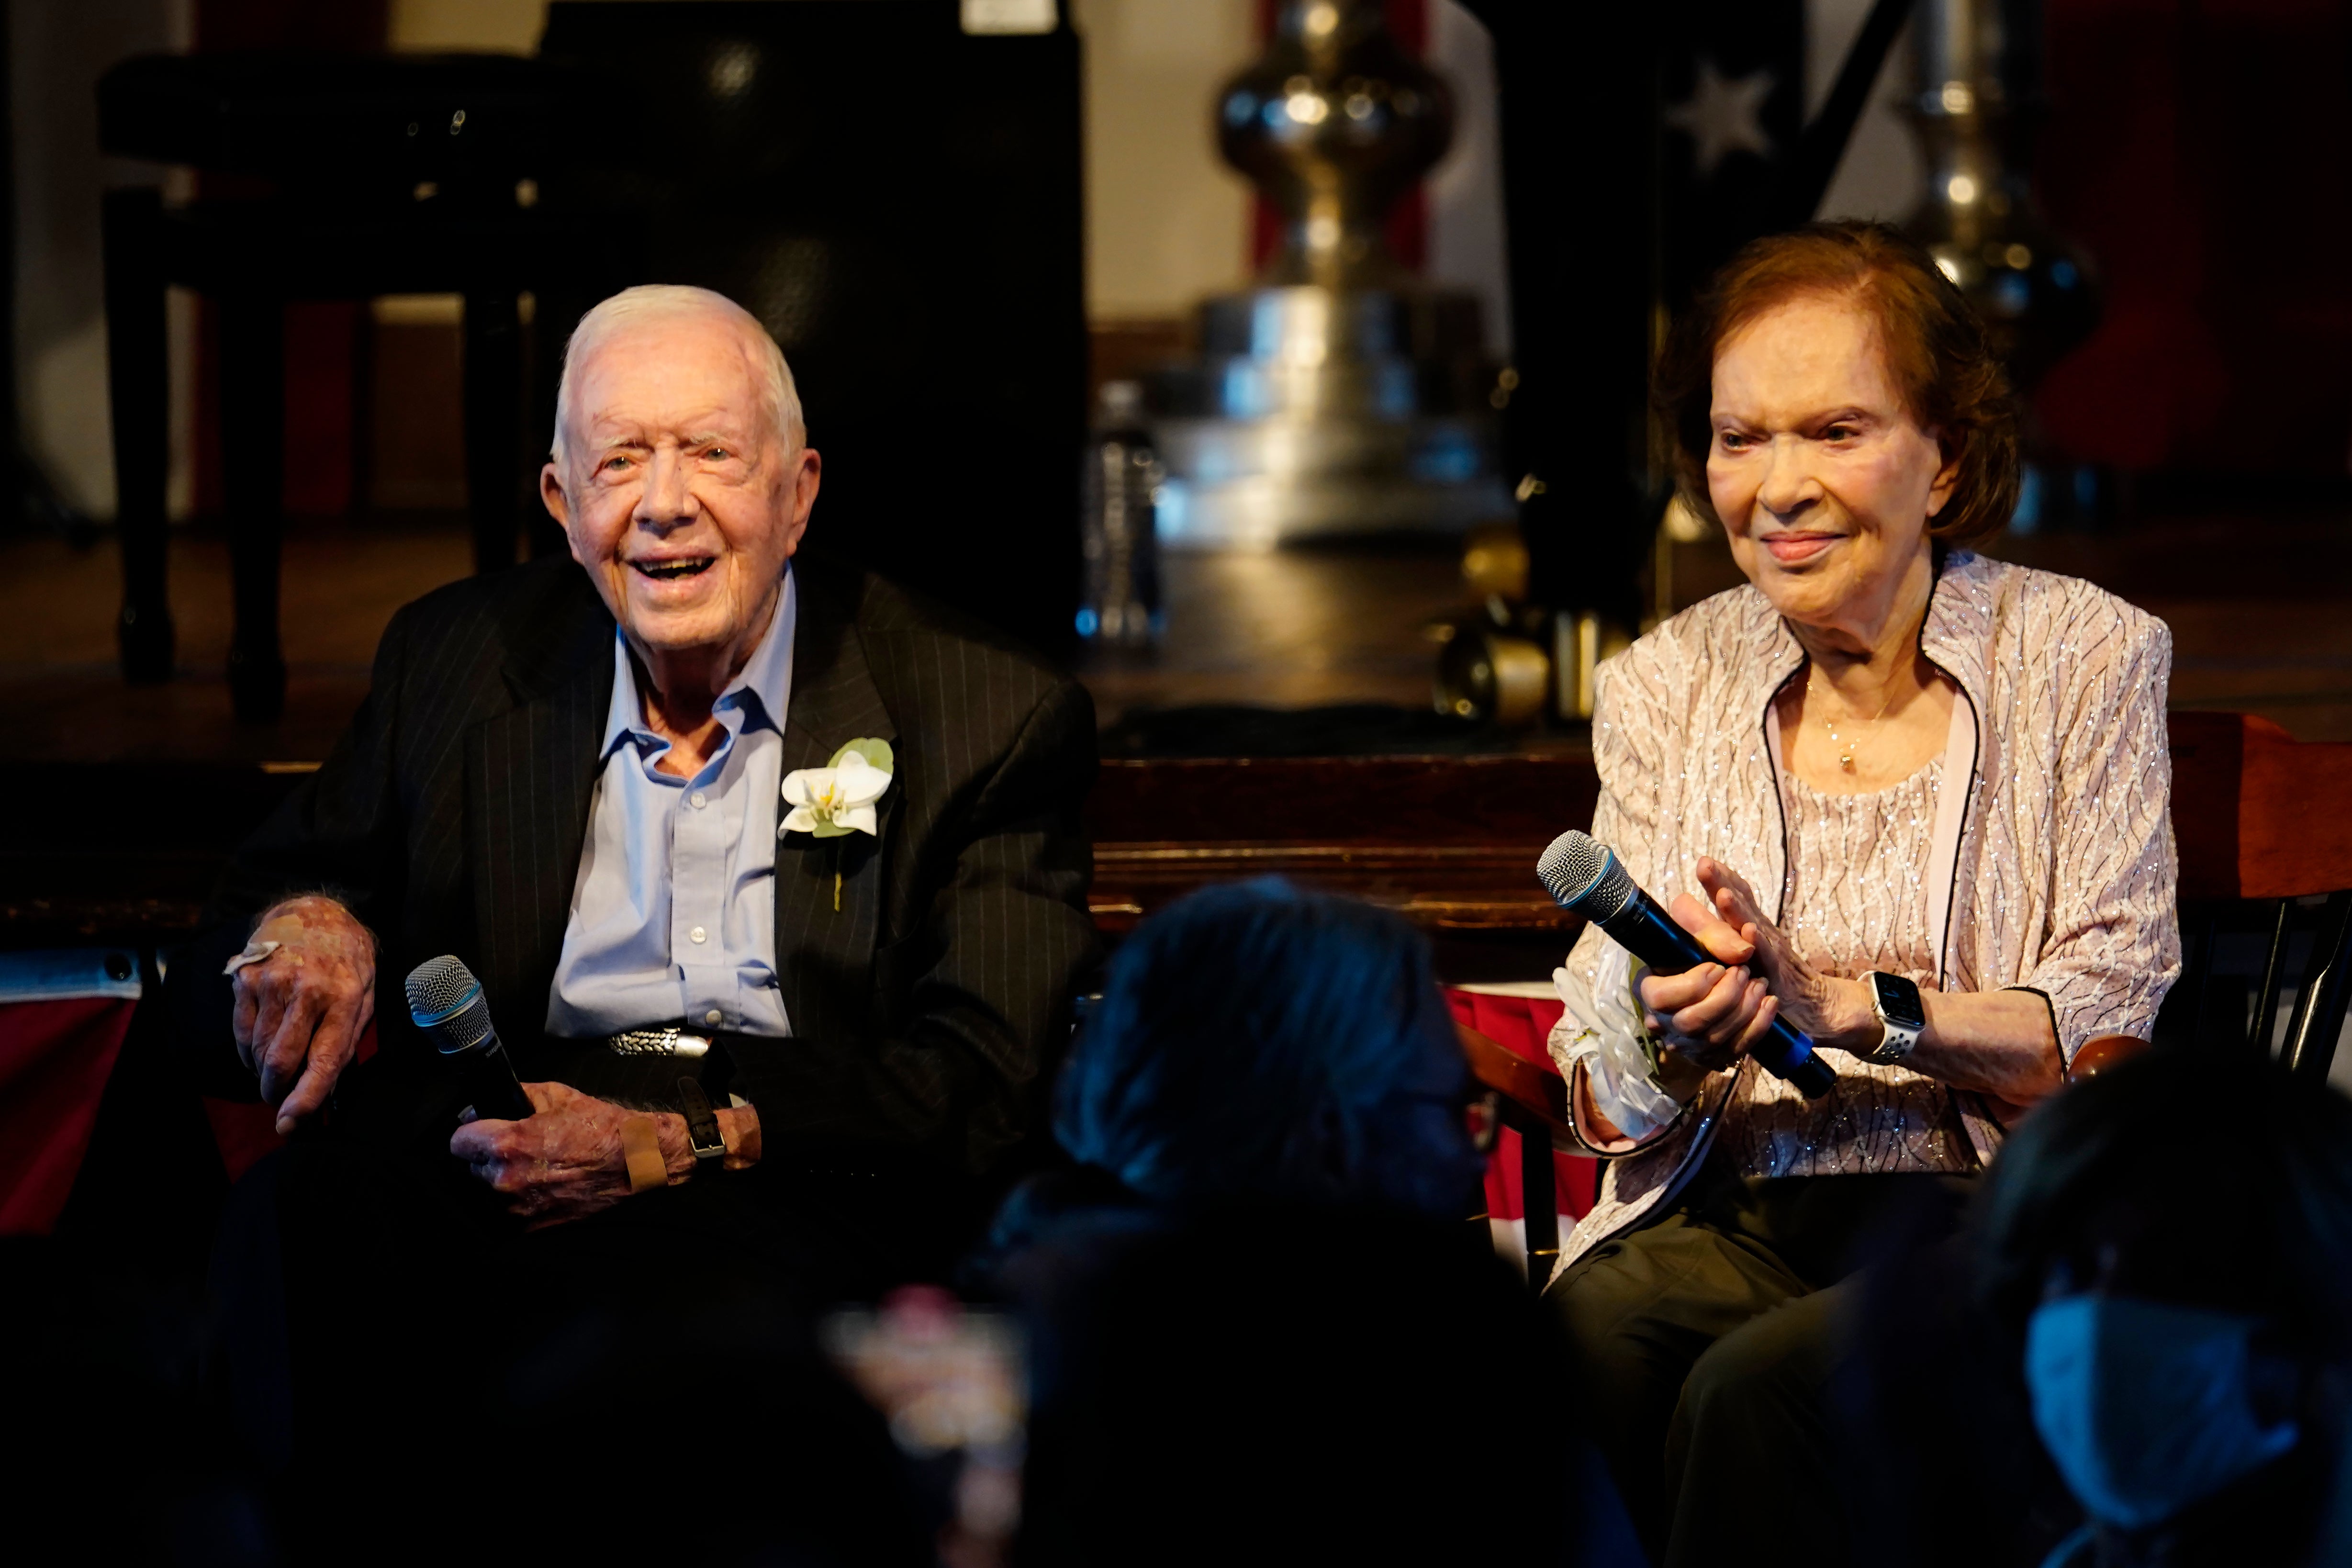 Jimmy Carter and Rosalynn Carter in 2021 together